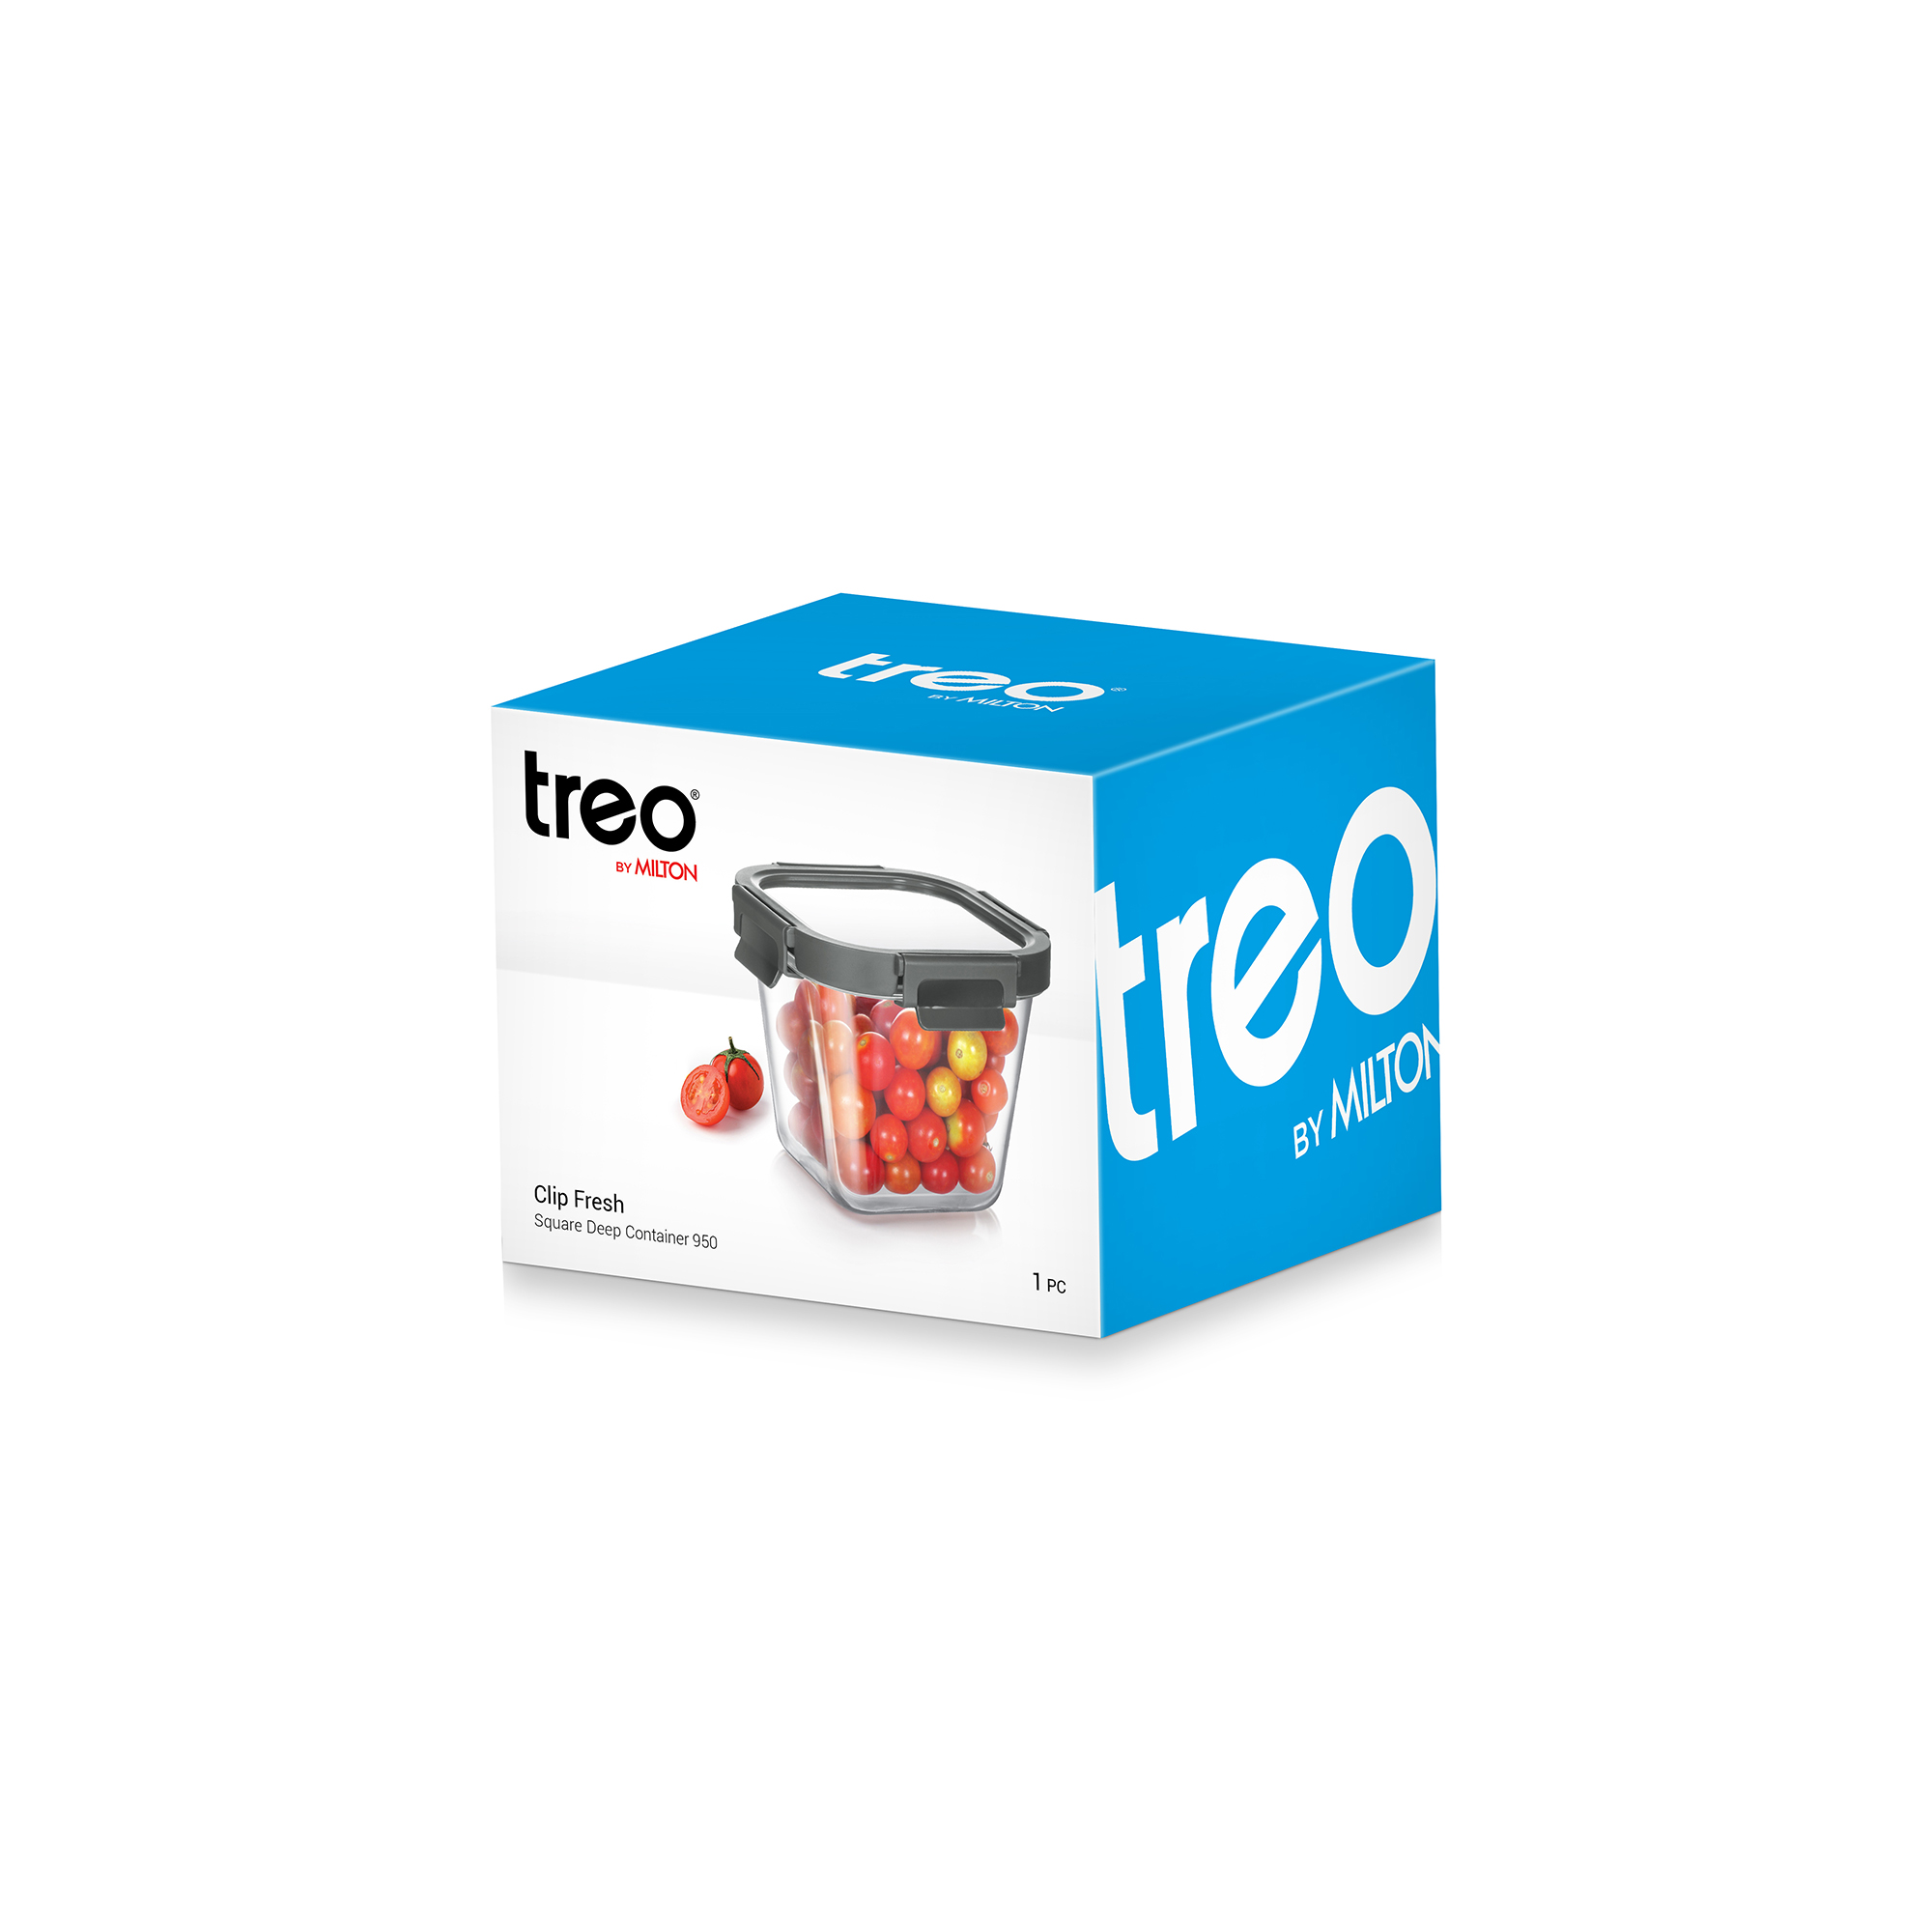 Treo Clip Fresh Square Deep Container